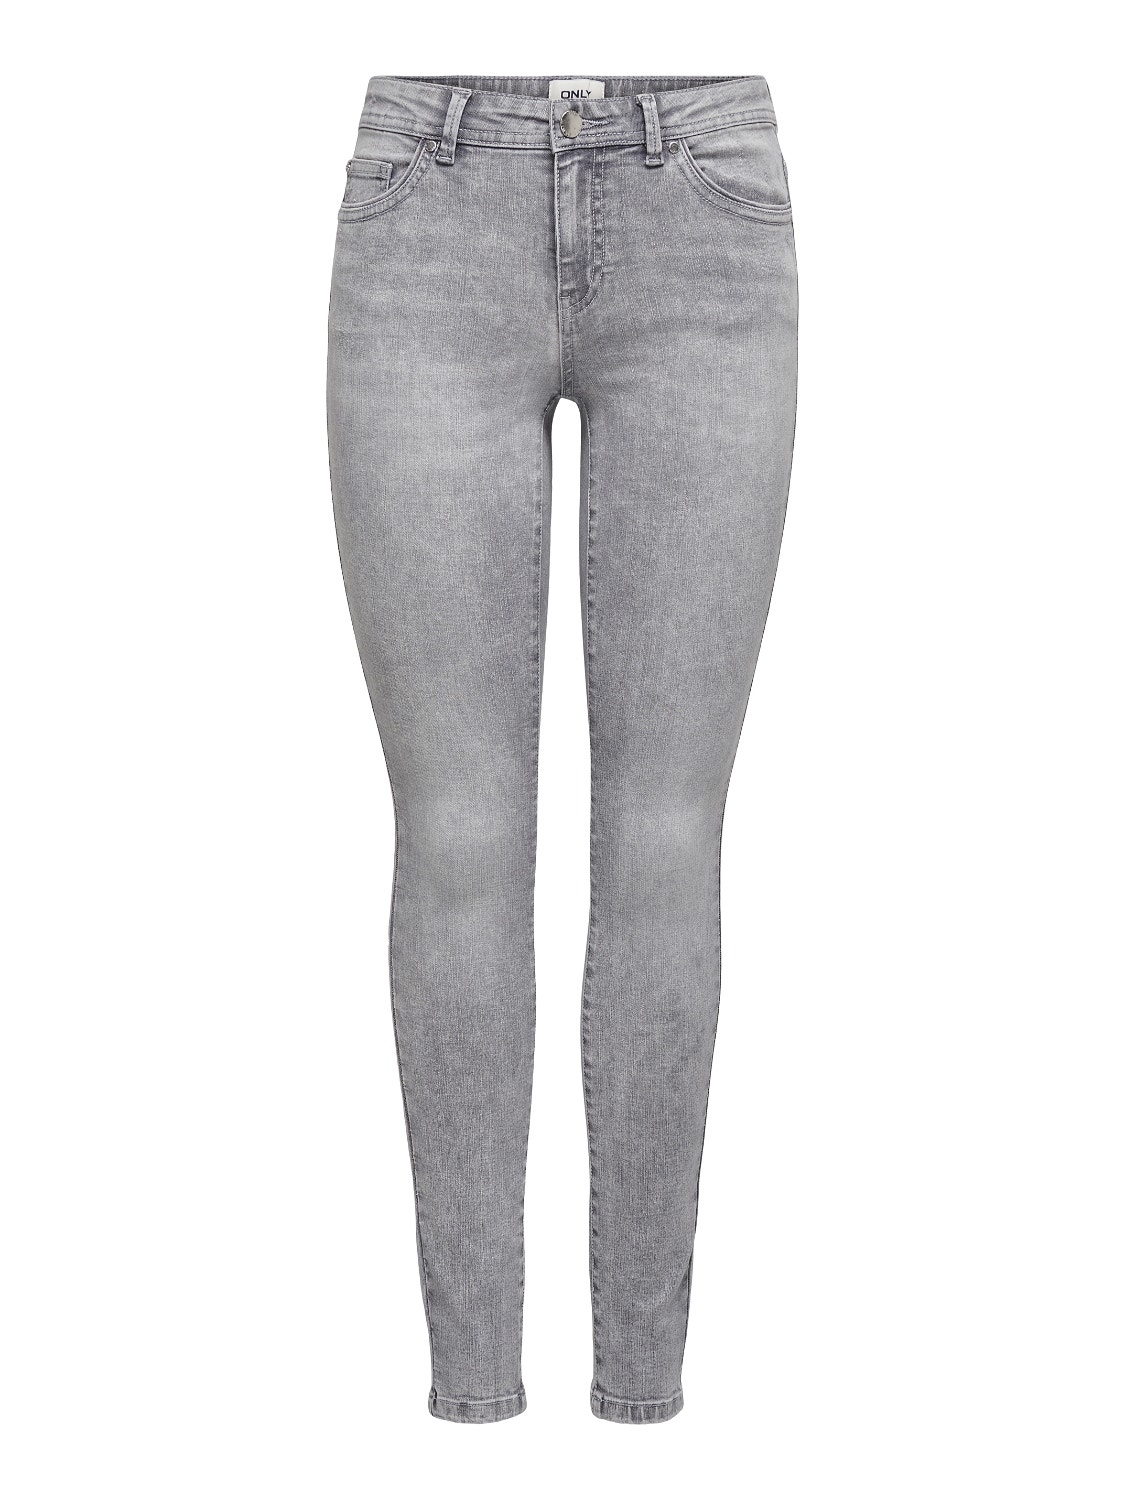 ONLY Skinny Fit Mittlere Taille Jeans -Medium Grey Denim - 15223167